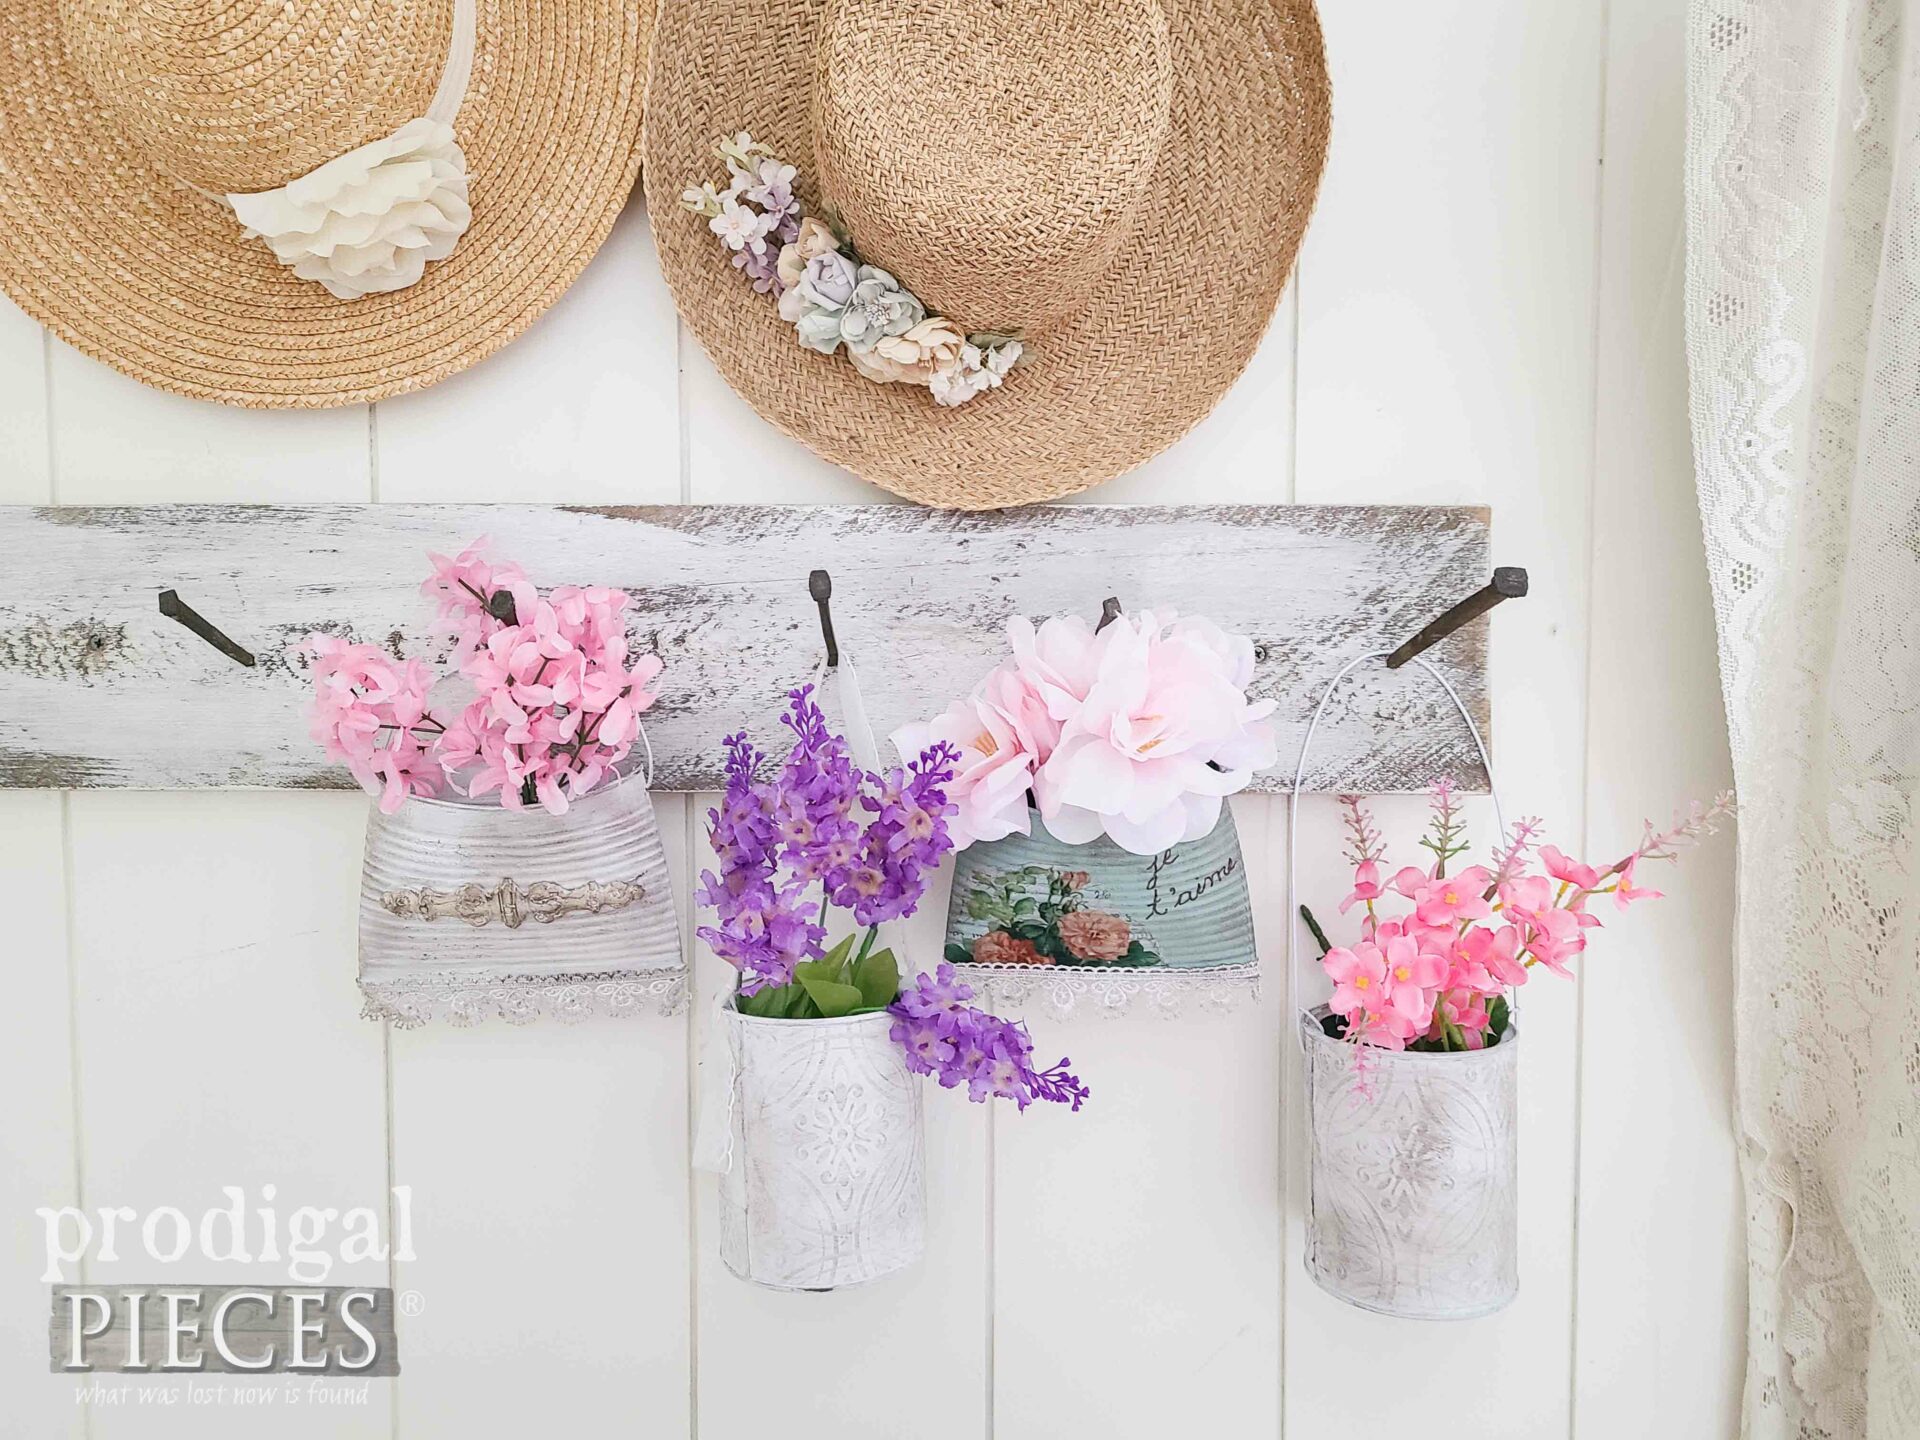 Farmhouse Budget Spring Decor itno Upcycled Tin Can Pockets with video tutorial by Larissa of Prodigal Pieces | prodigalpieces.com #prodigalpieces #farmhouse #spring